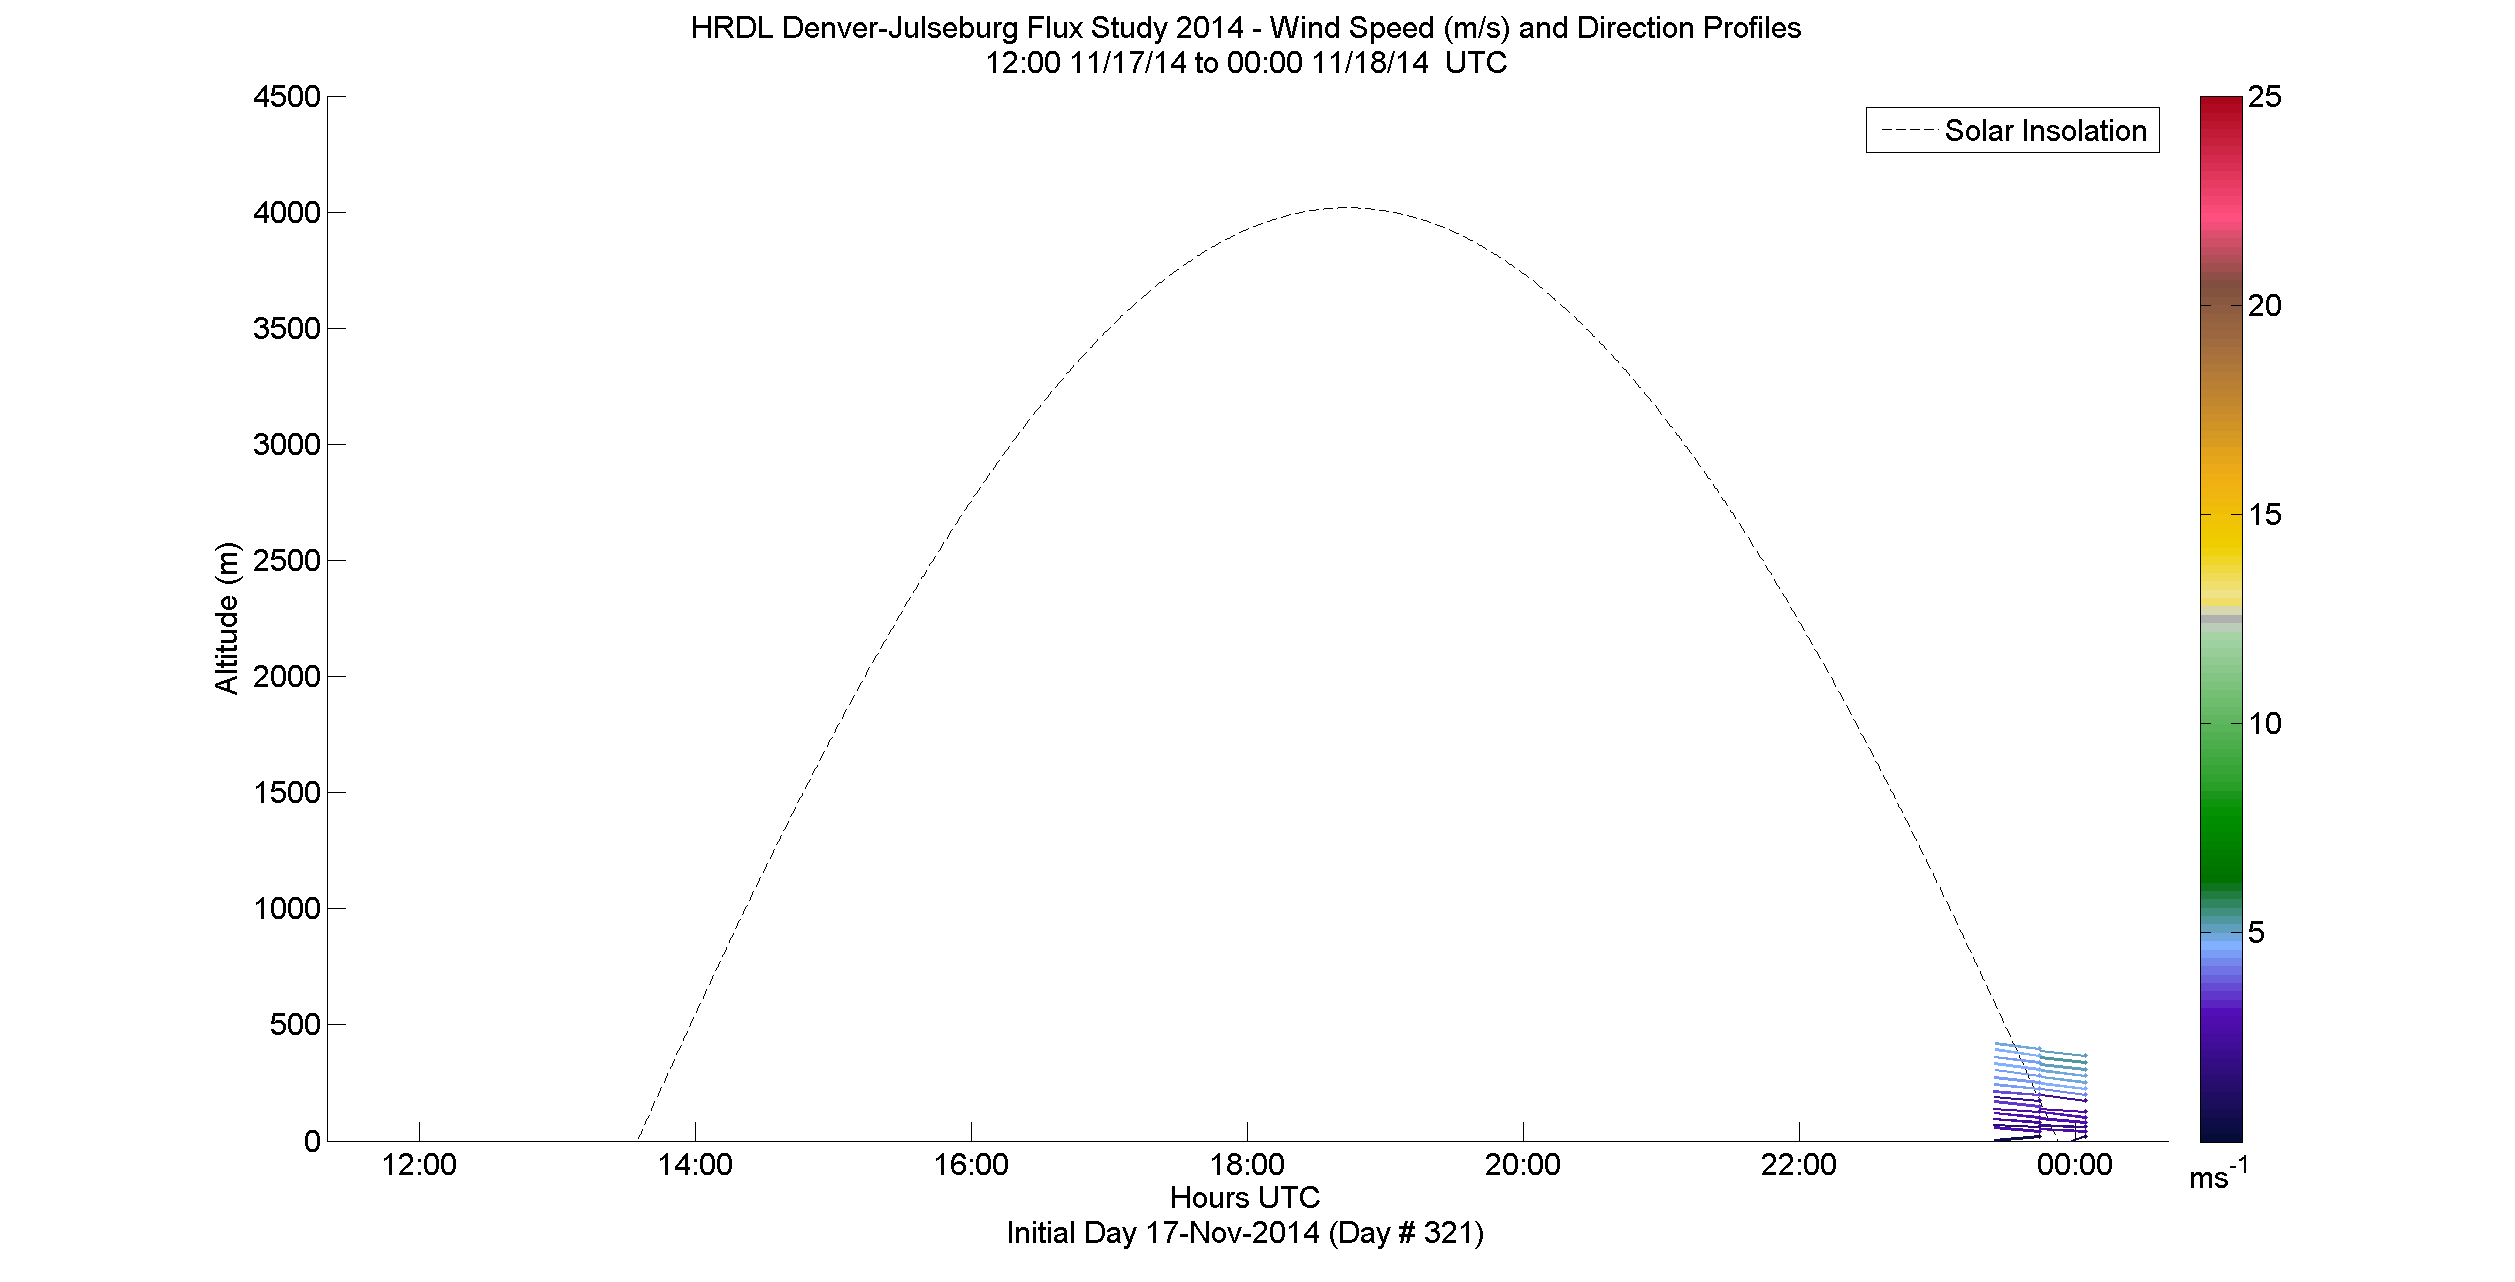 HRDL speed and direction profile - November 17 pm